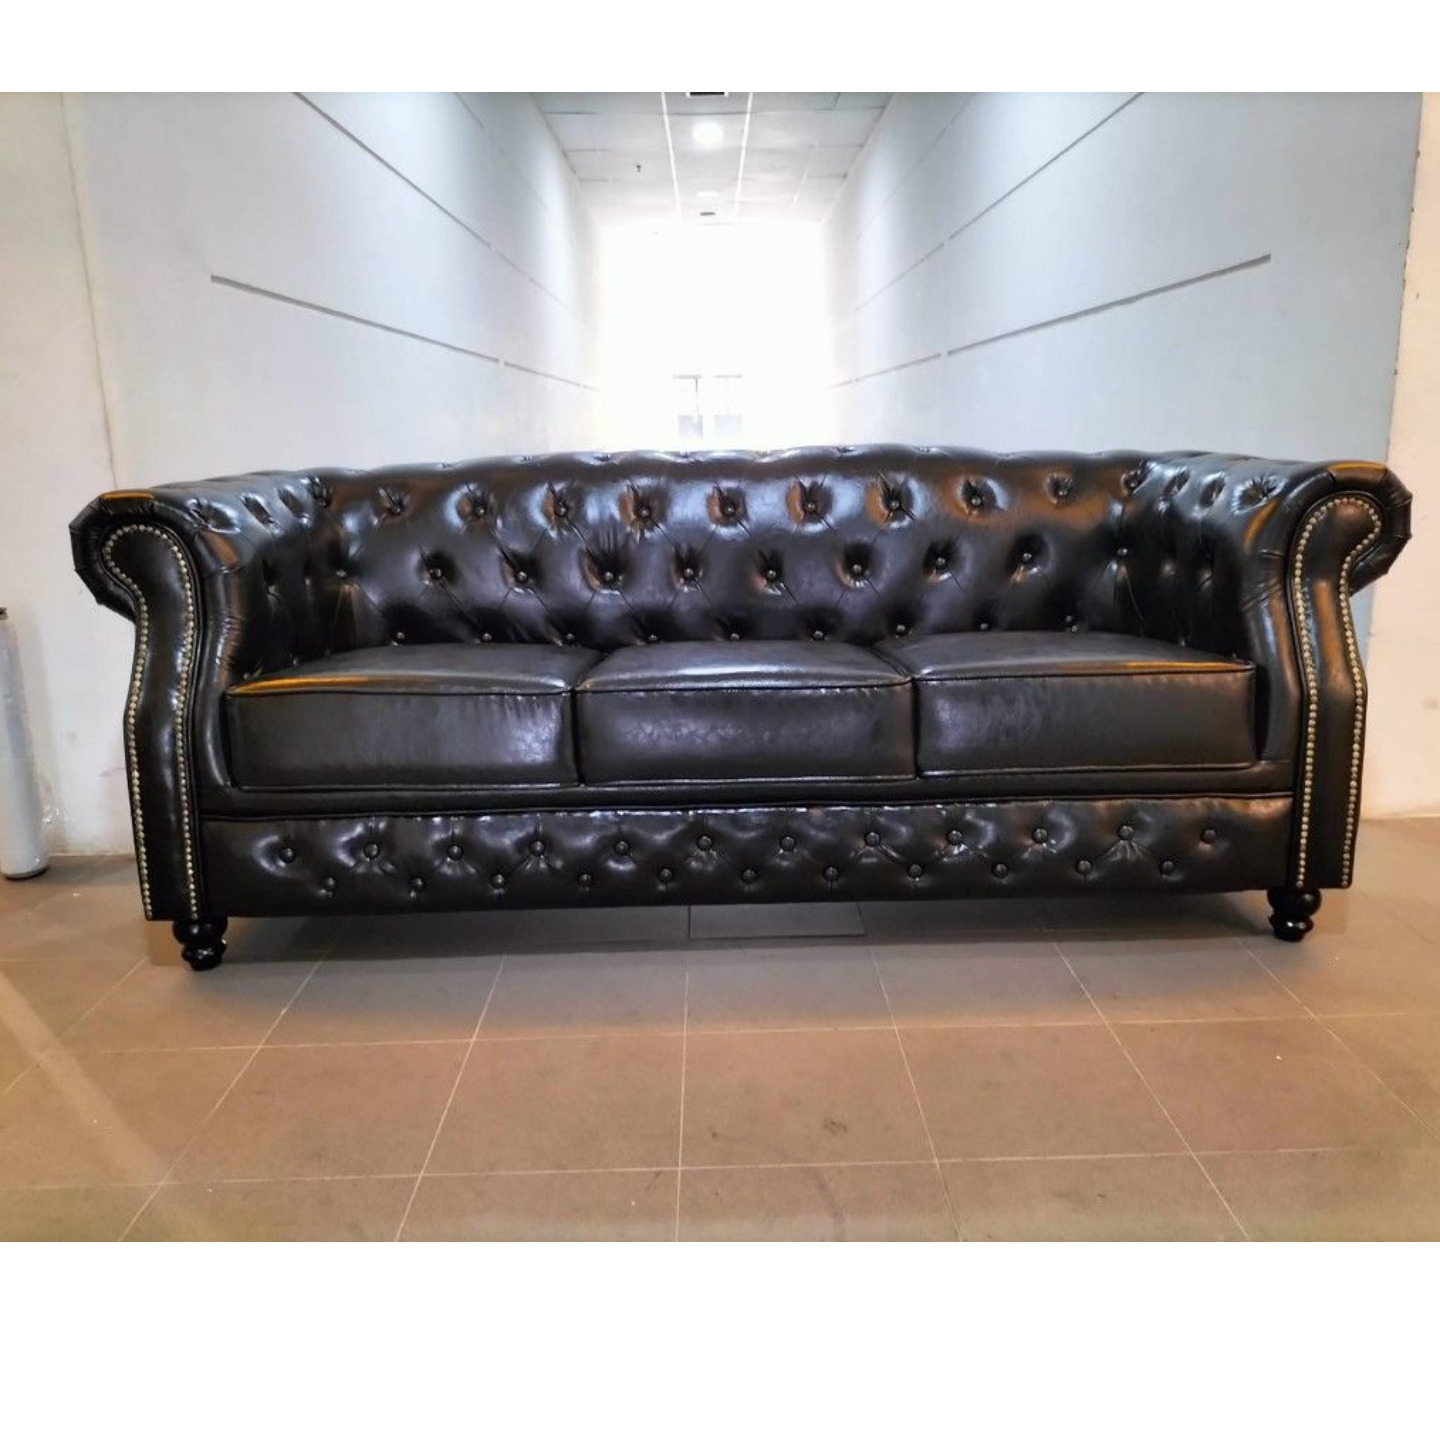 PRE ORDER BOTTEVA 3 Seater Chesterfield Sofa in GLOSS BLACK PU - Estimated Delivery by July 2023